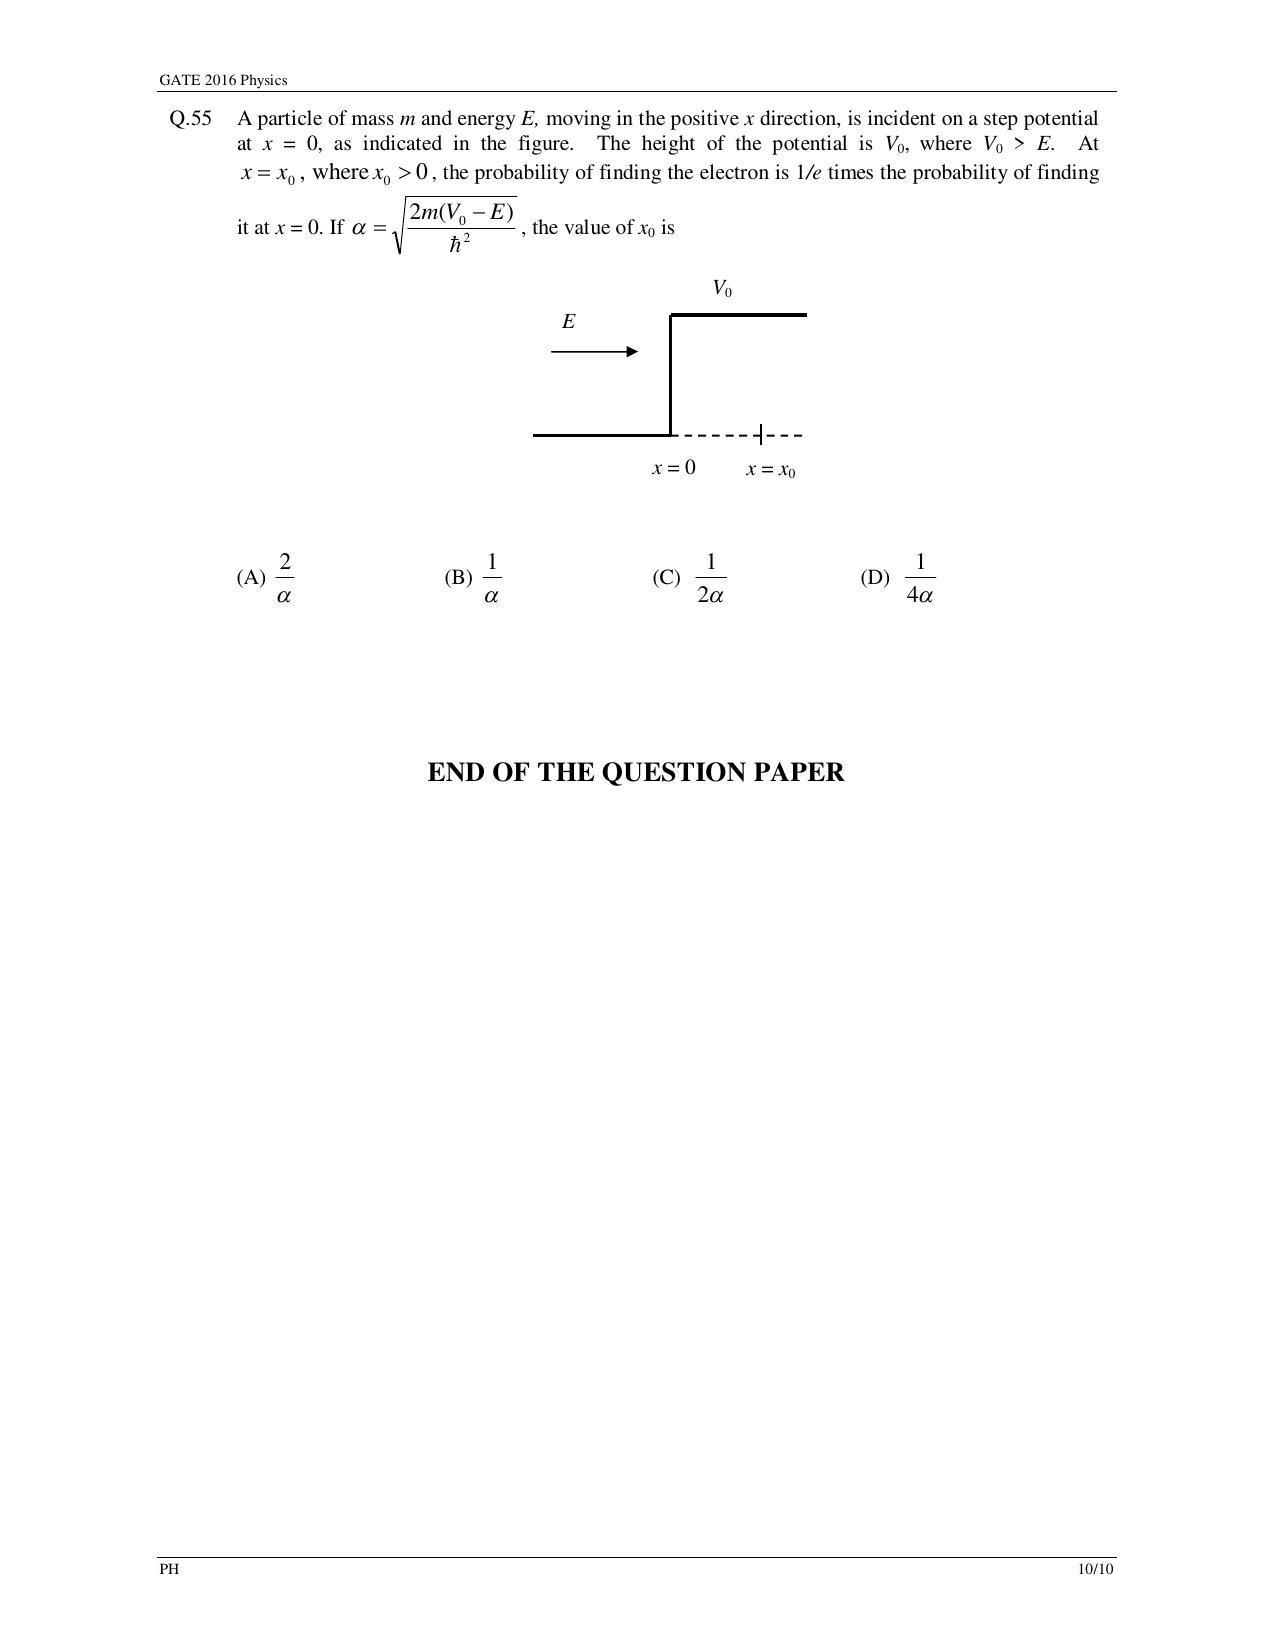 GATE 2016 Physics (PH) Question Paper with Answer Key - Page 13